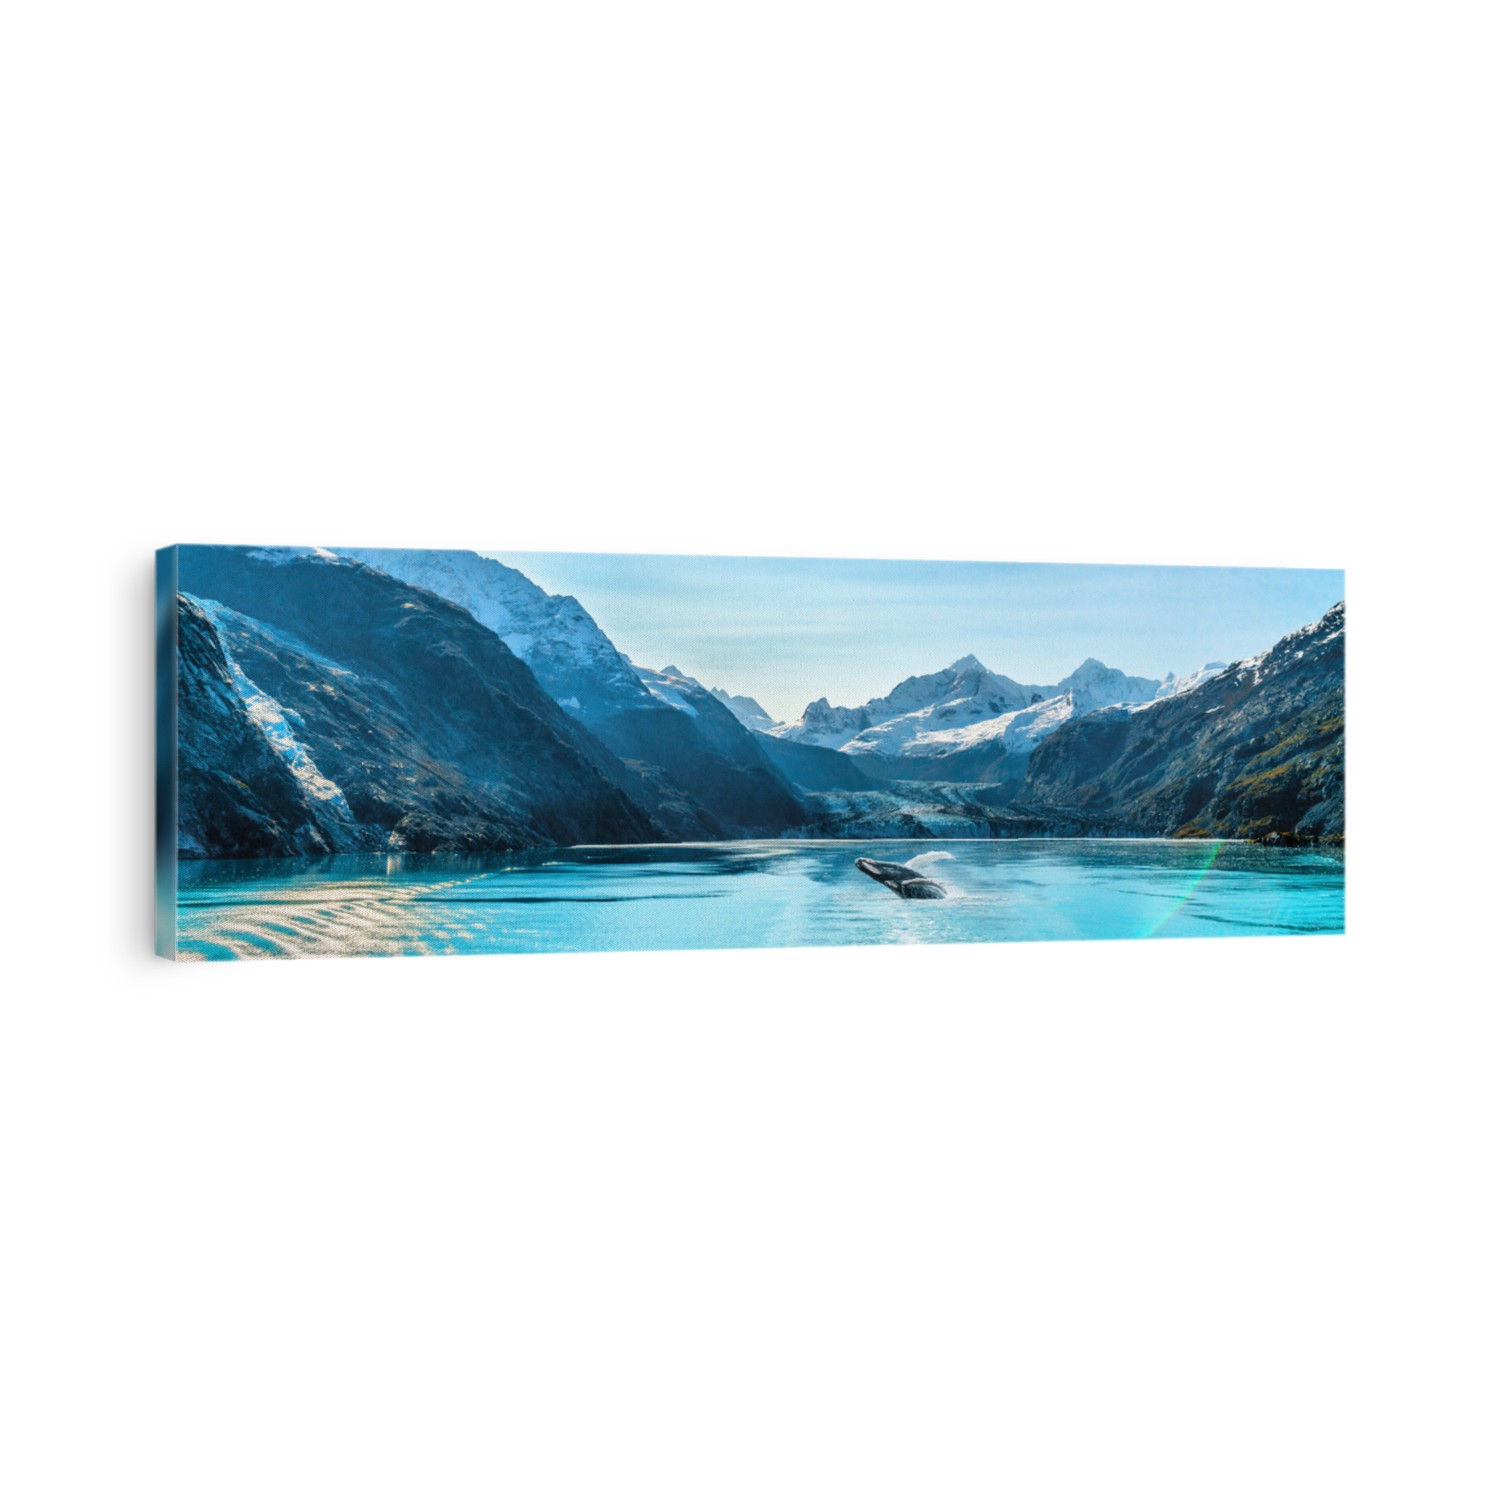 Alaska luxury cruise travel panoramic. Scenery landscape panorama with humpback whale composite breaching out of waters on glacier bay background.